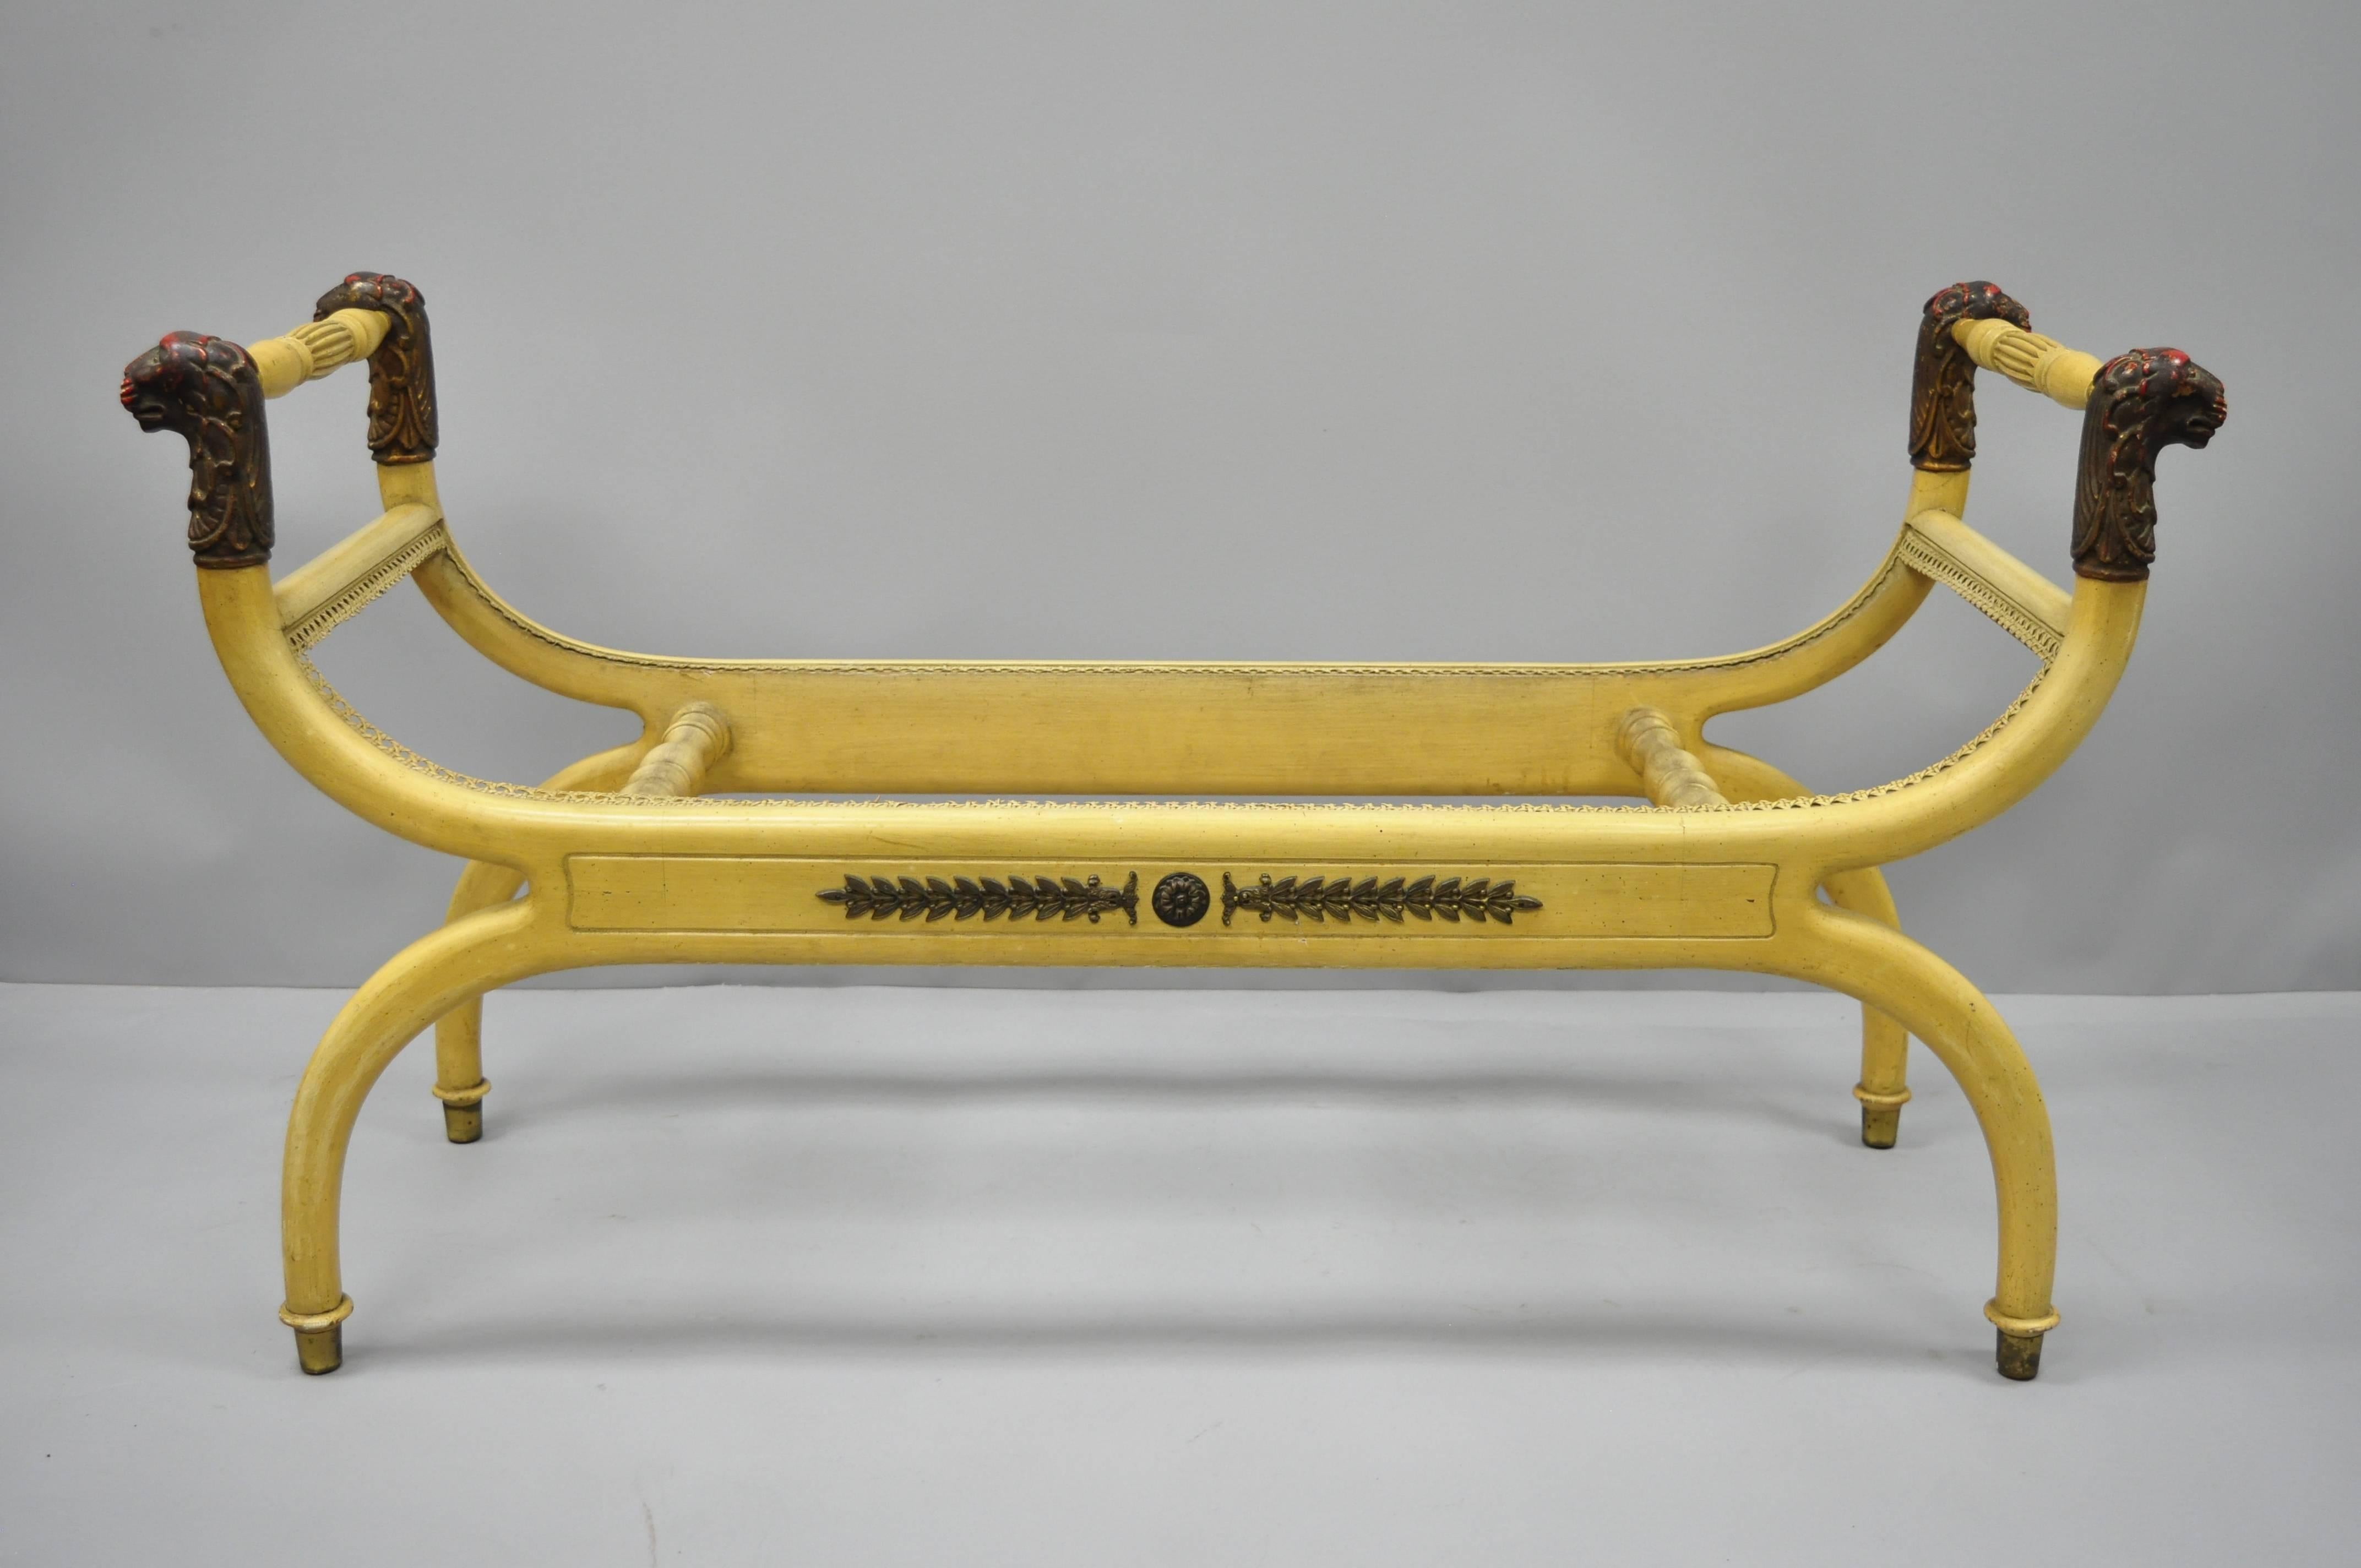 Vintage Regency neoclassical style lion head curule long bench by Bruschi & Rolando. Item features carved lion heads, solid wood construction, nicely carved detail, original tag, brass accents, great style and form. Originally had a cane seat, circa